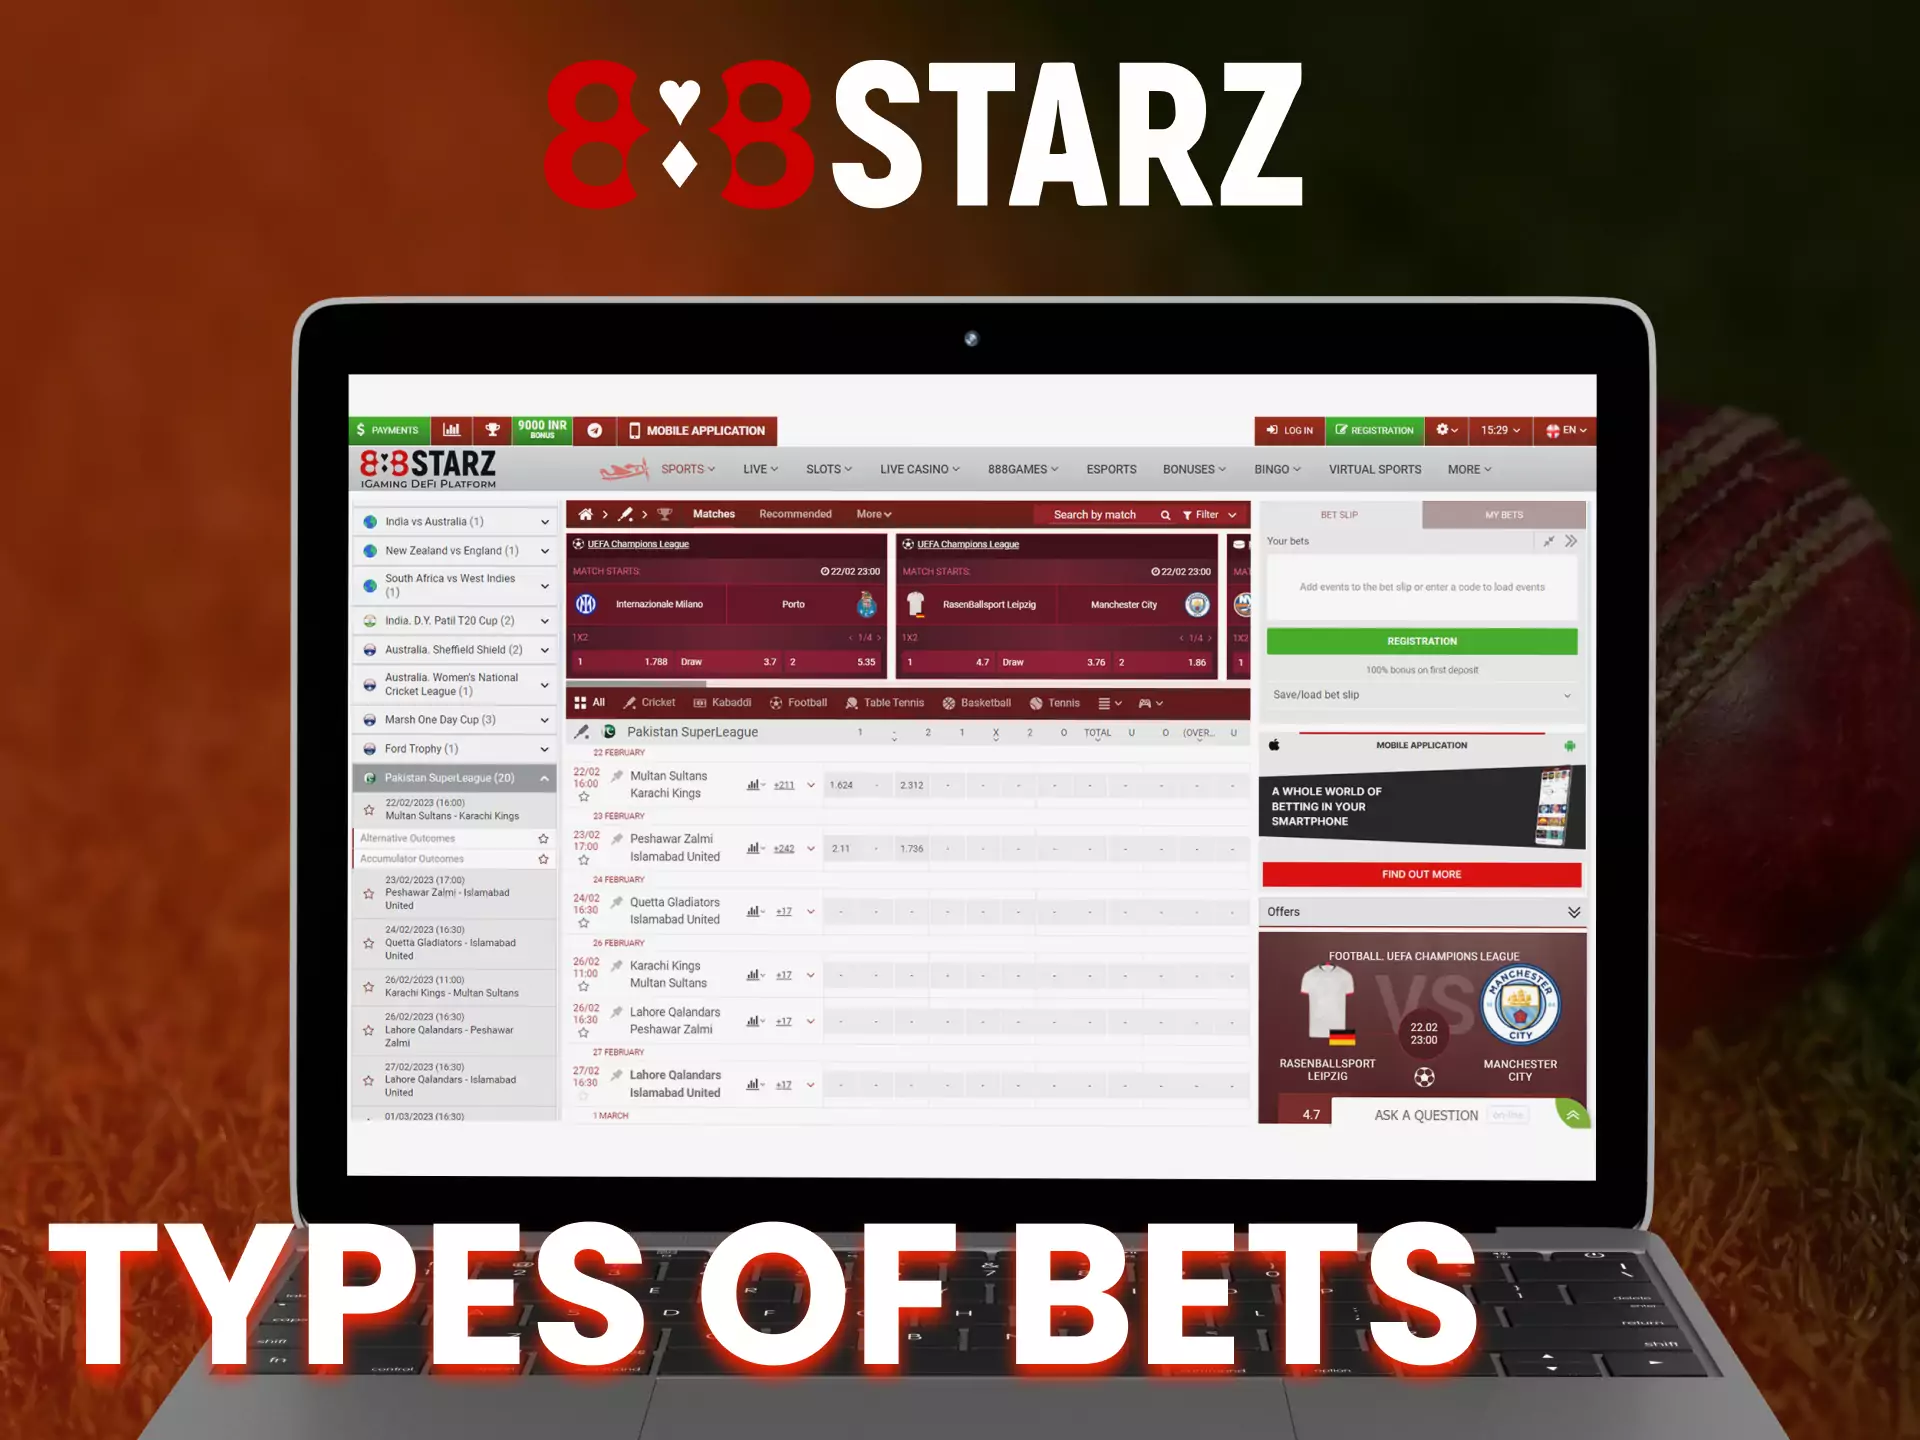 888starz provides wide variety of betting experience.